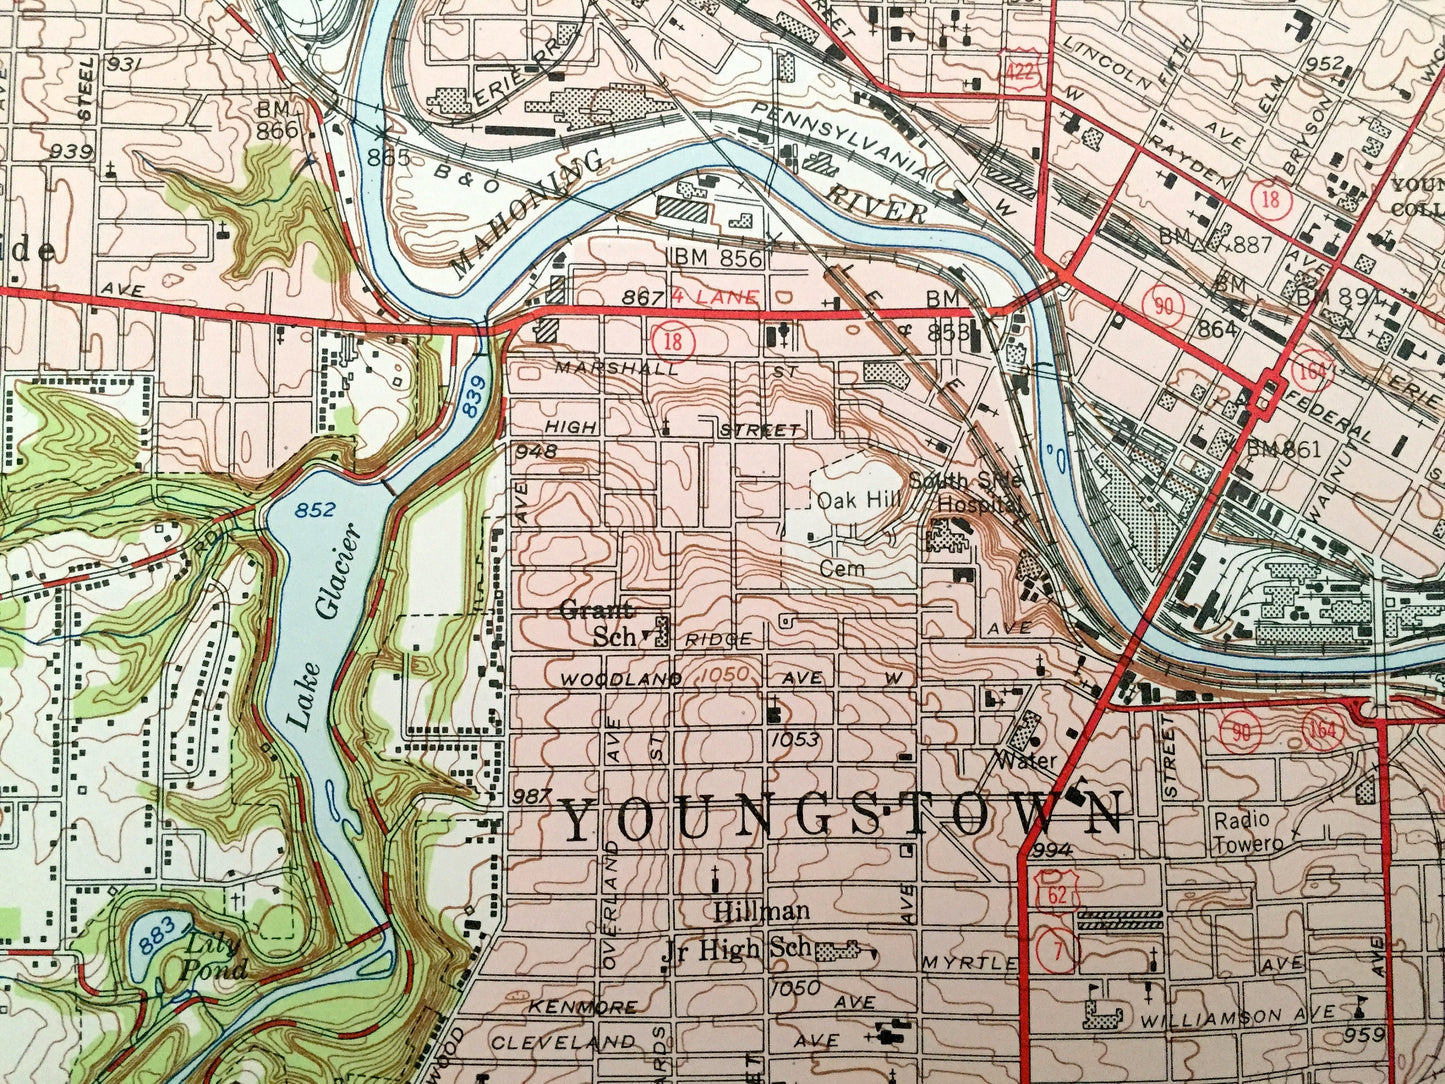 Antique Youngstown, Ohio 1954 WALL SIZE US Geological Survey Topographic Map – Mahoning County, Trumbull, Downtown North Heights Hazelton oh